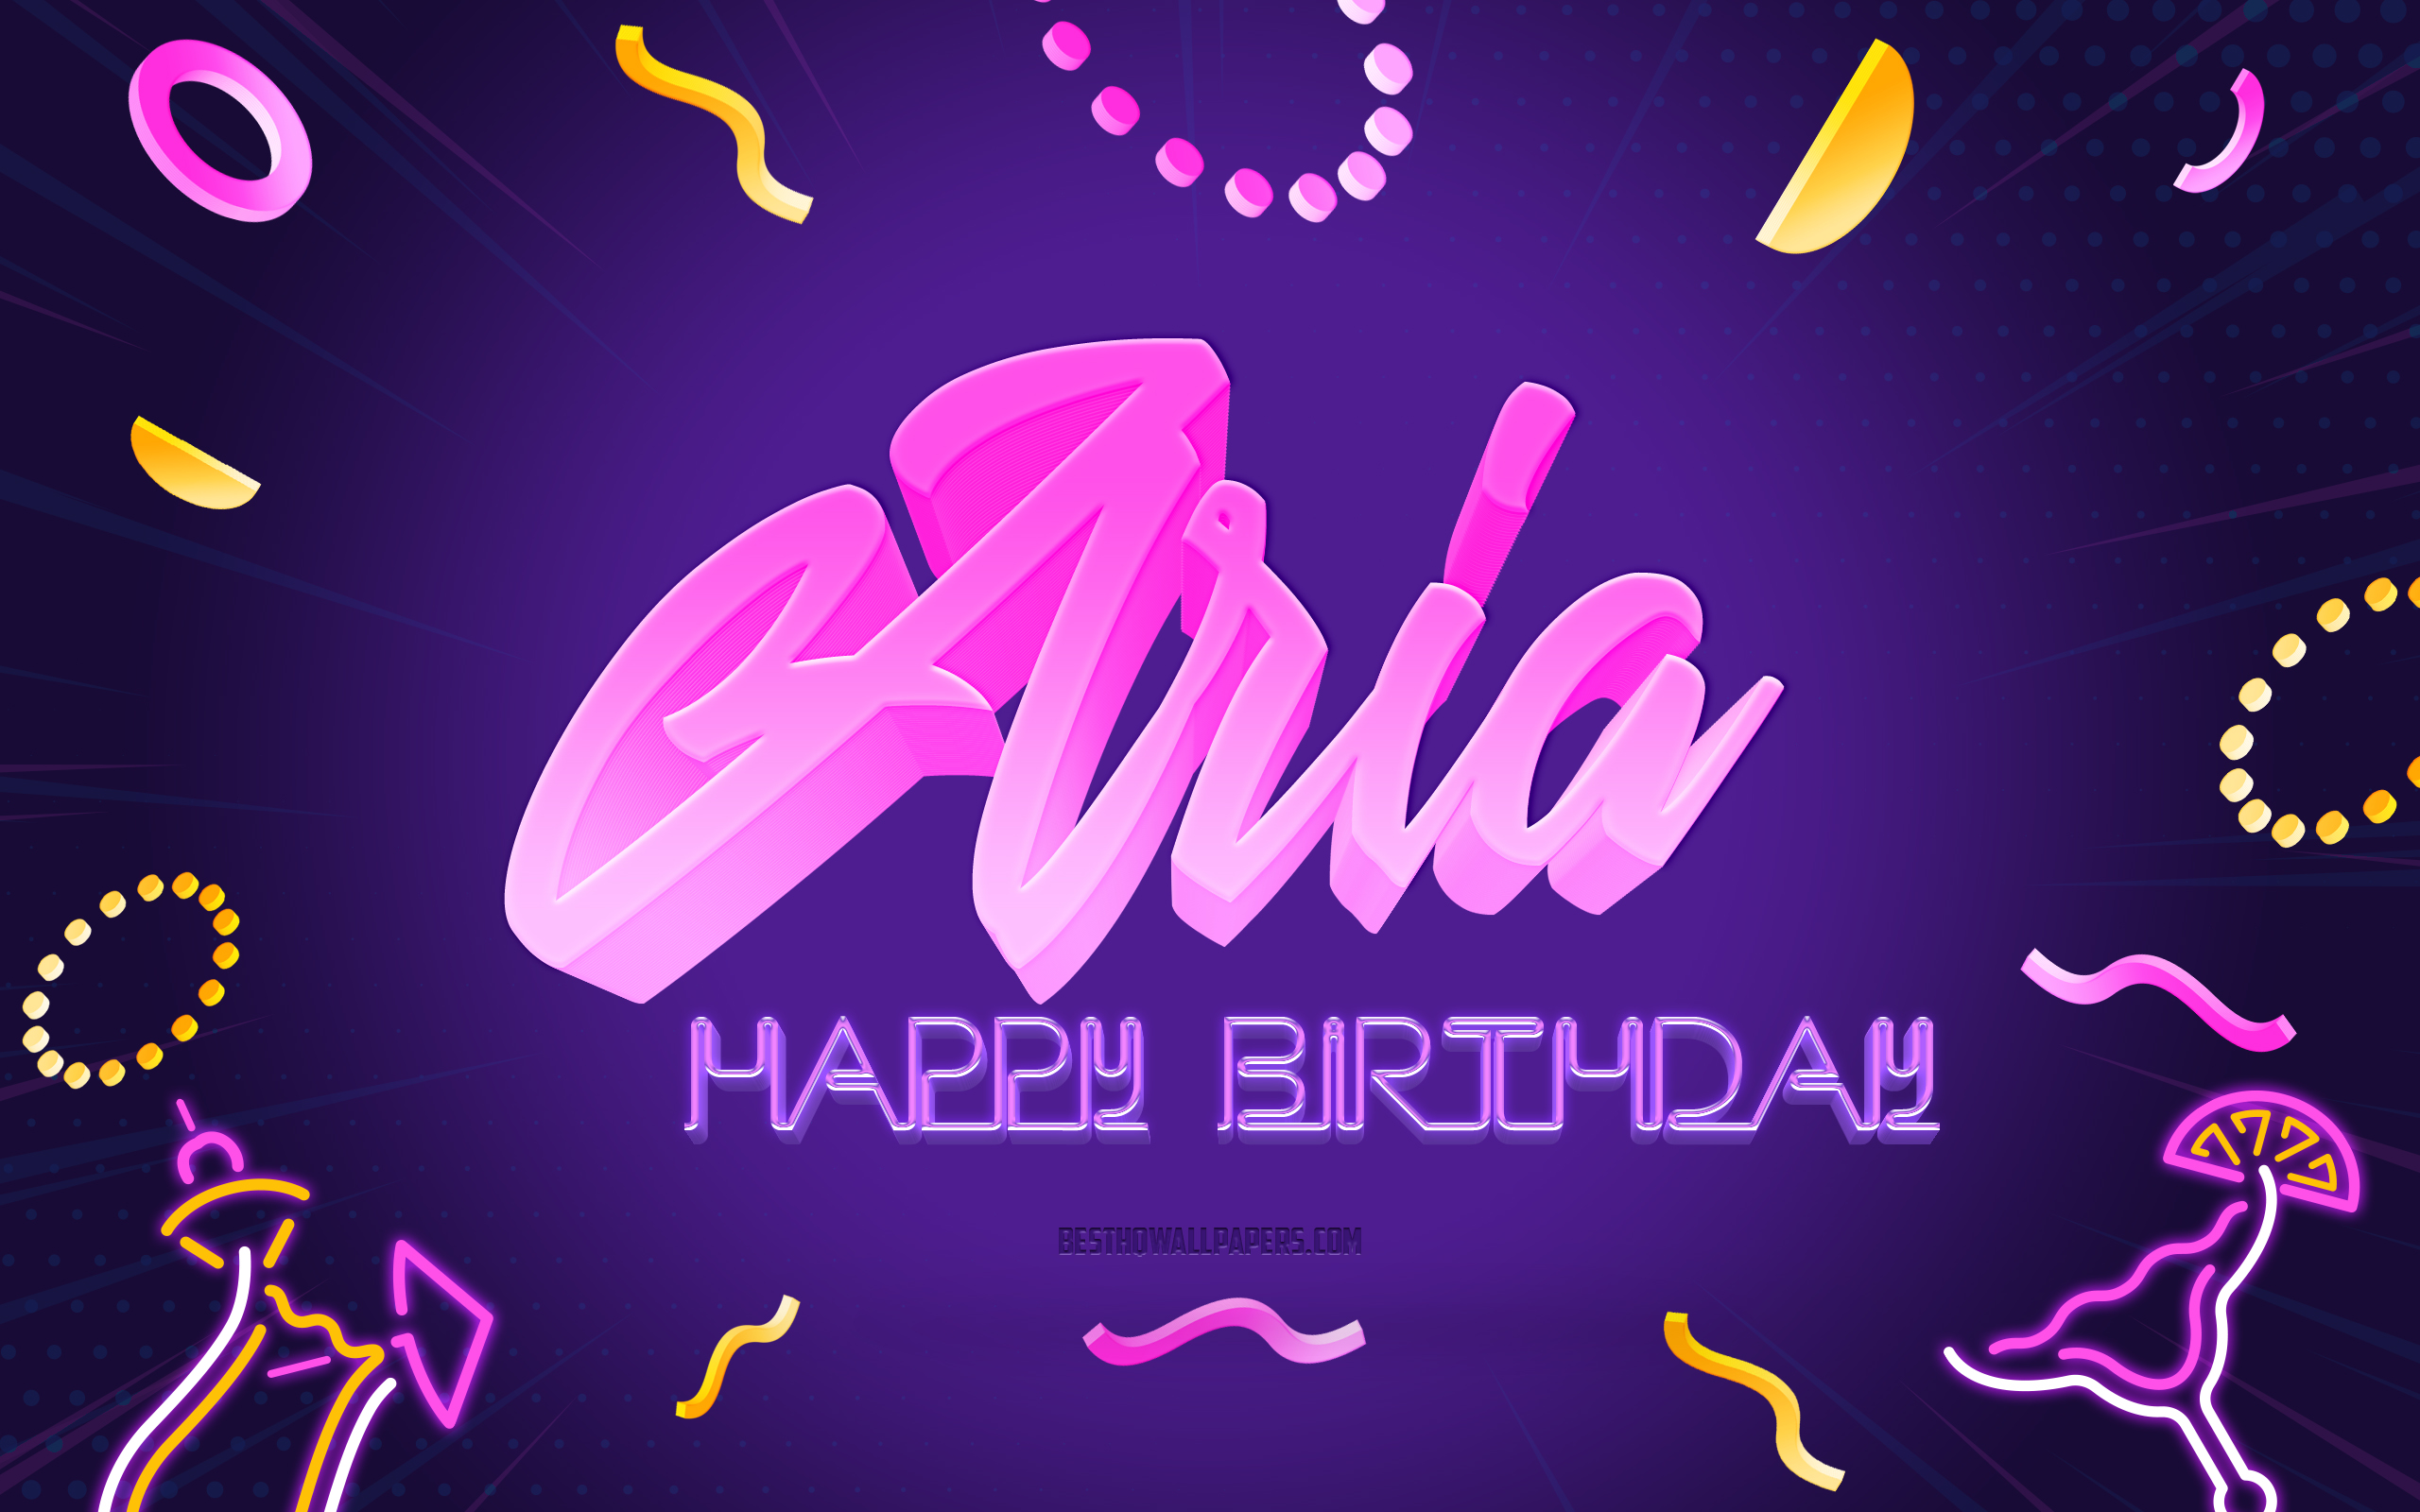 Download wallpapers Happy Birthday Aria, 4k, Purple Party Background ...